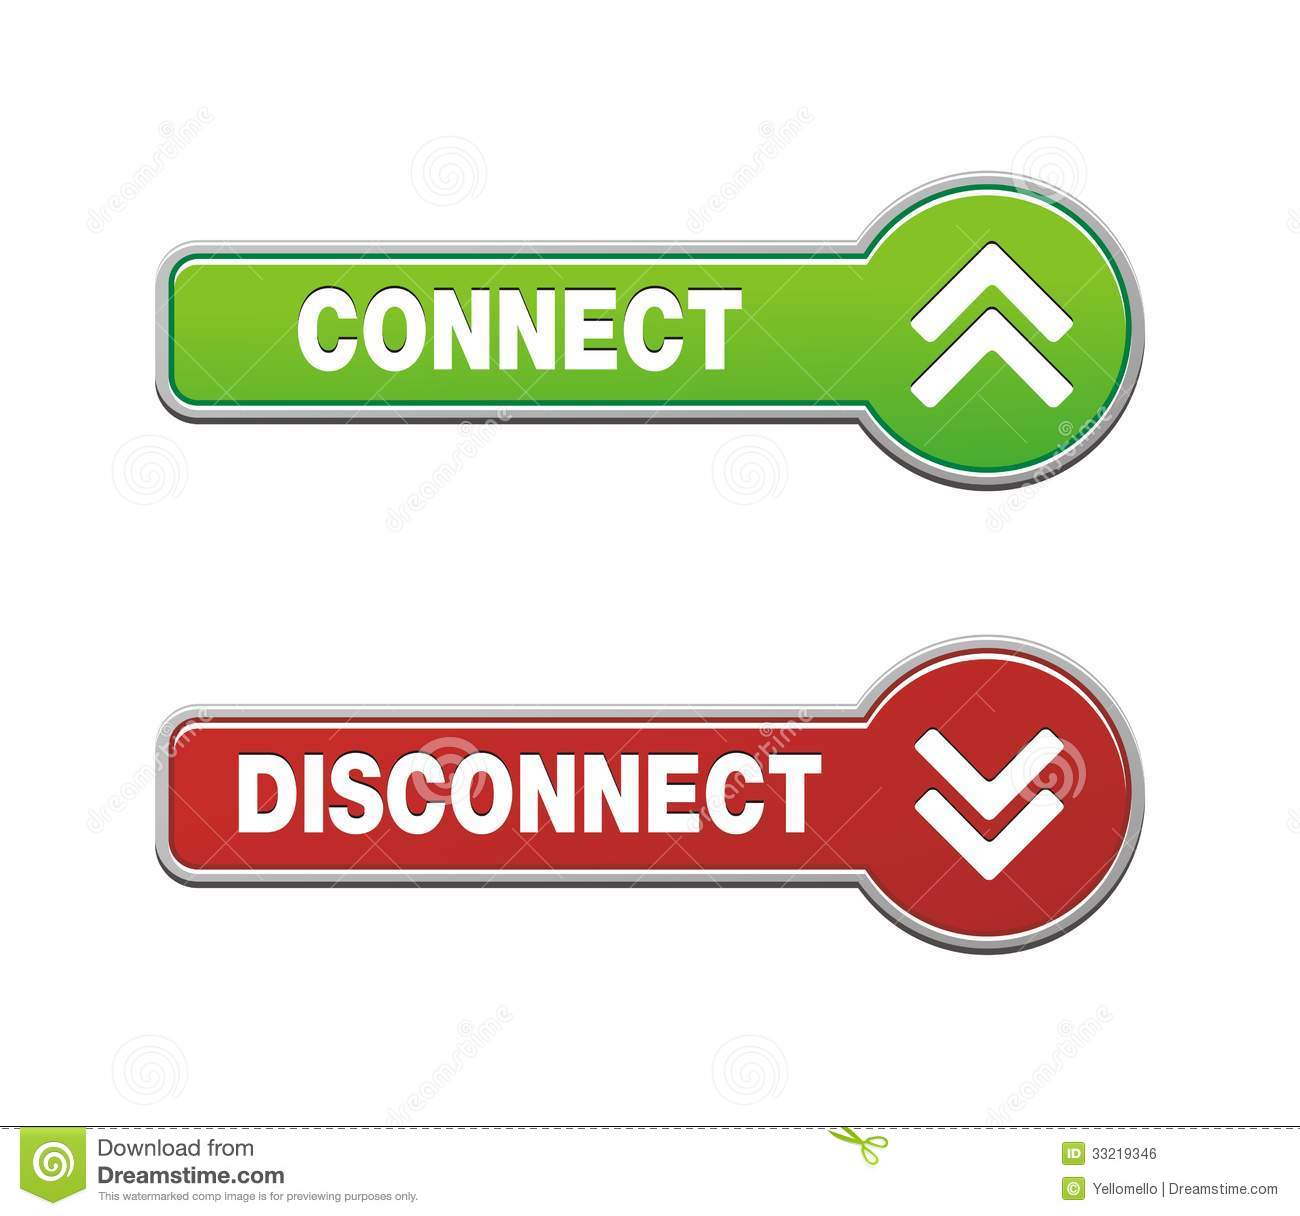 Disconnect Connect Button Sets Royalty Free Stock Image   Image